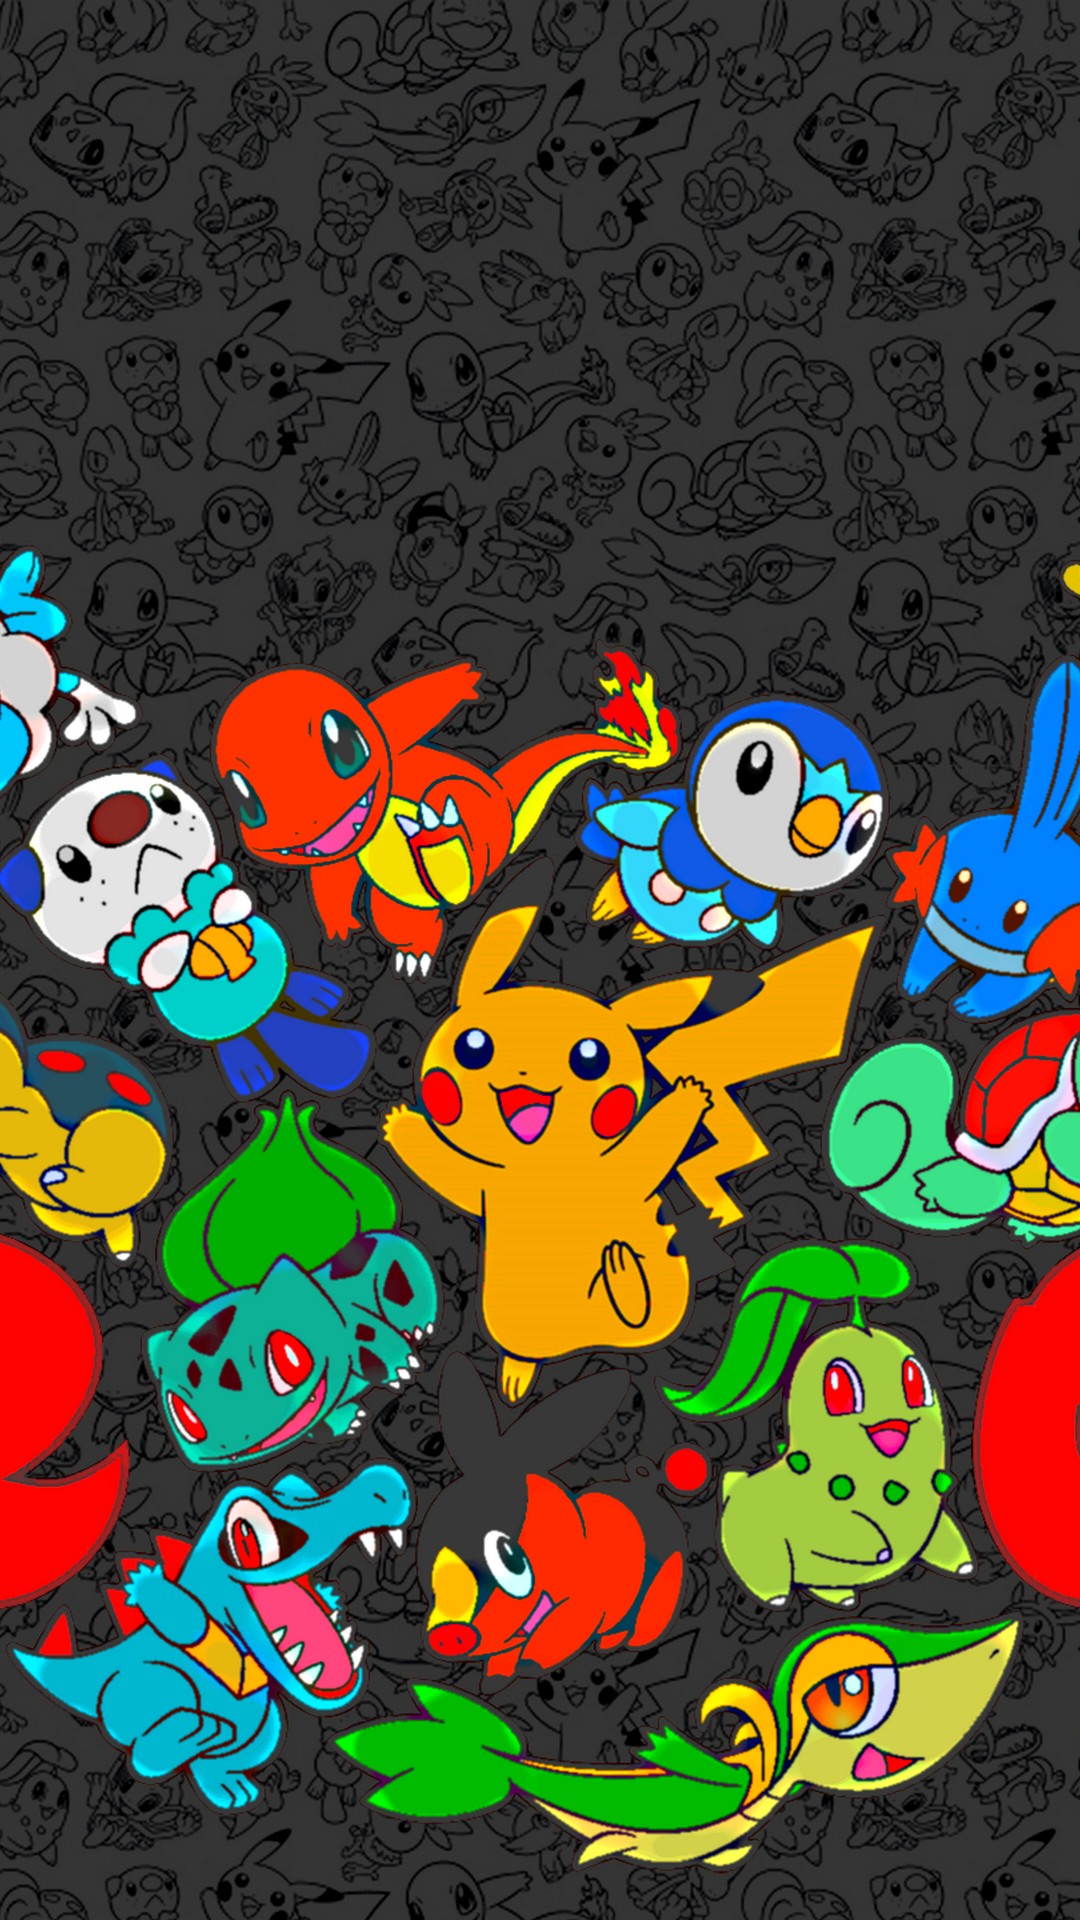 Pokemon Wallpaper Android With high-resolution 1080X1920 pixel. You can use this wallpaper for your Android backgrounds, Tablet, Samsung Screensavers, Mobile Phone Lock Screen and another Smartphones device